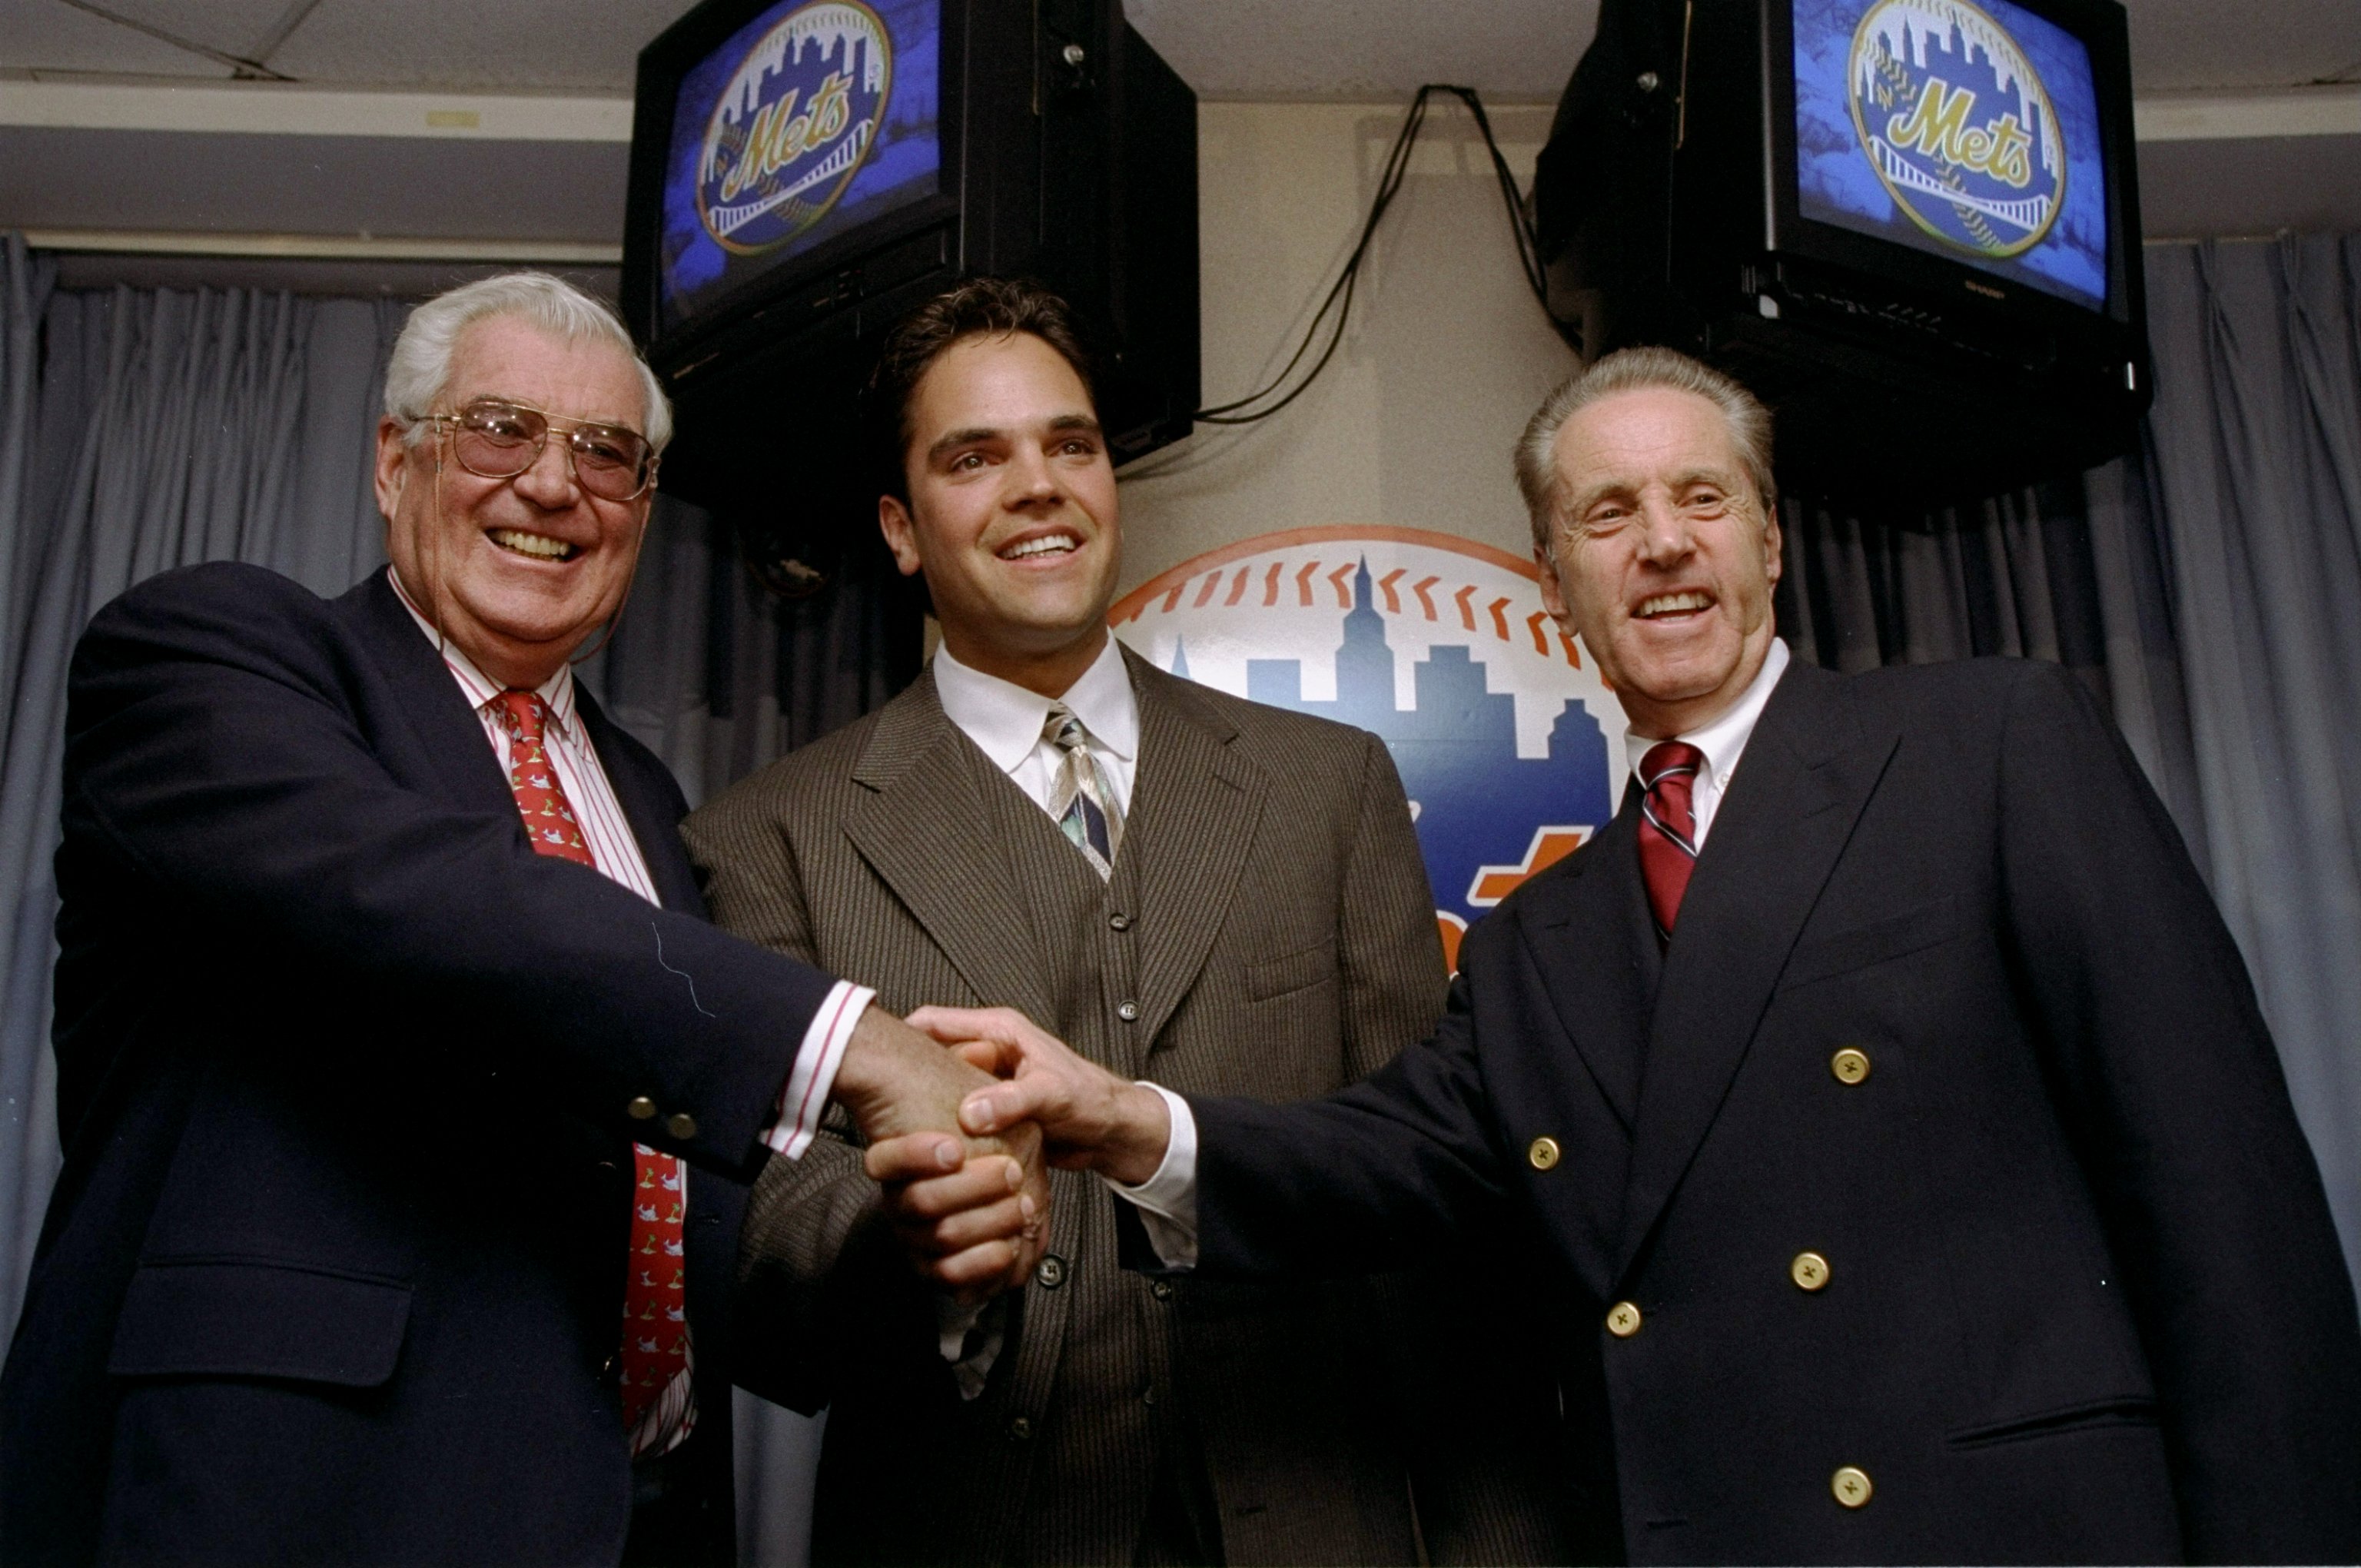 WATCH: Todd Zeile recounts Mike Piazza's epic Home Run after 9/11